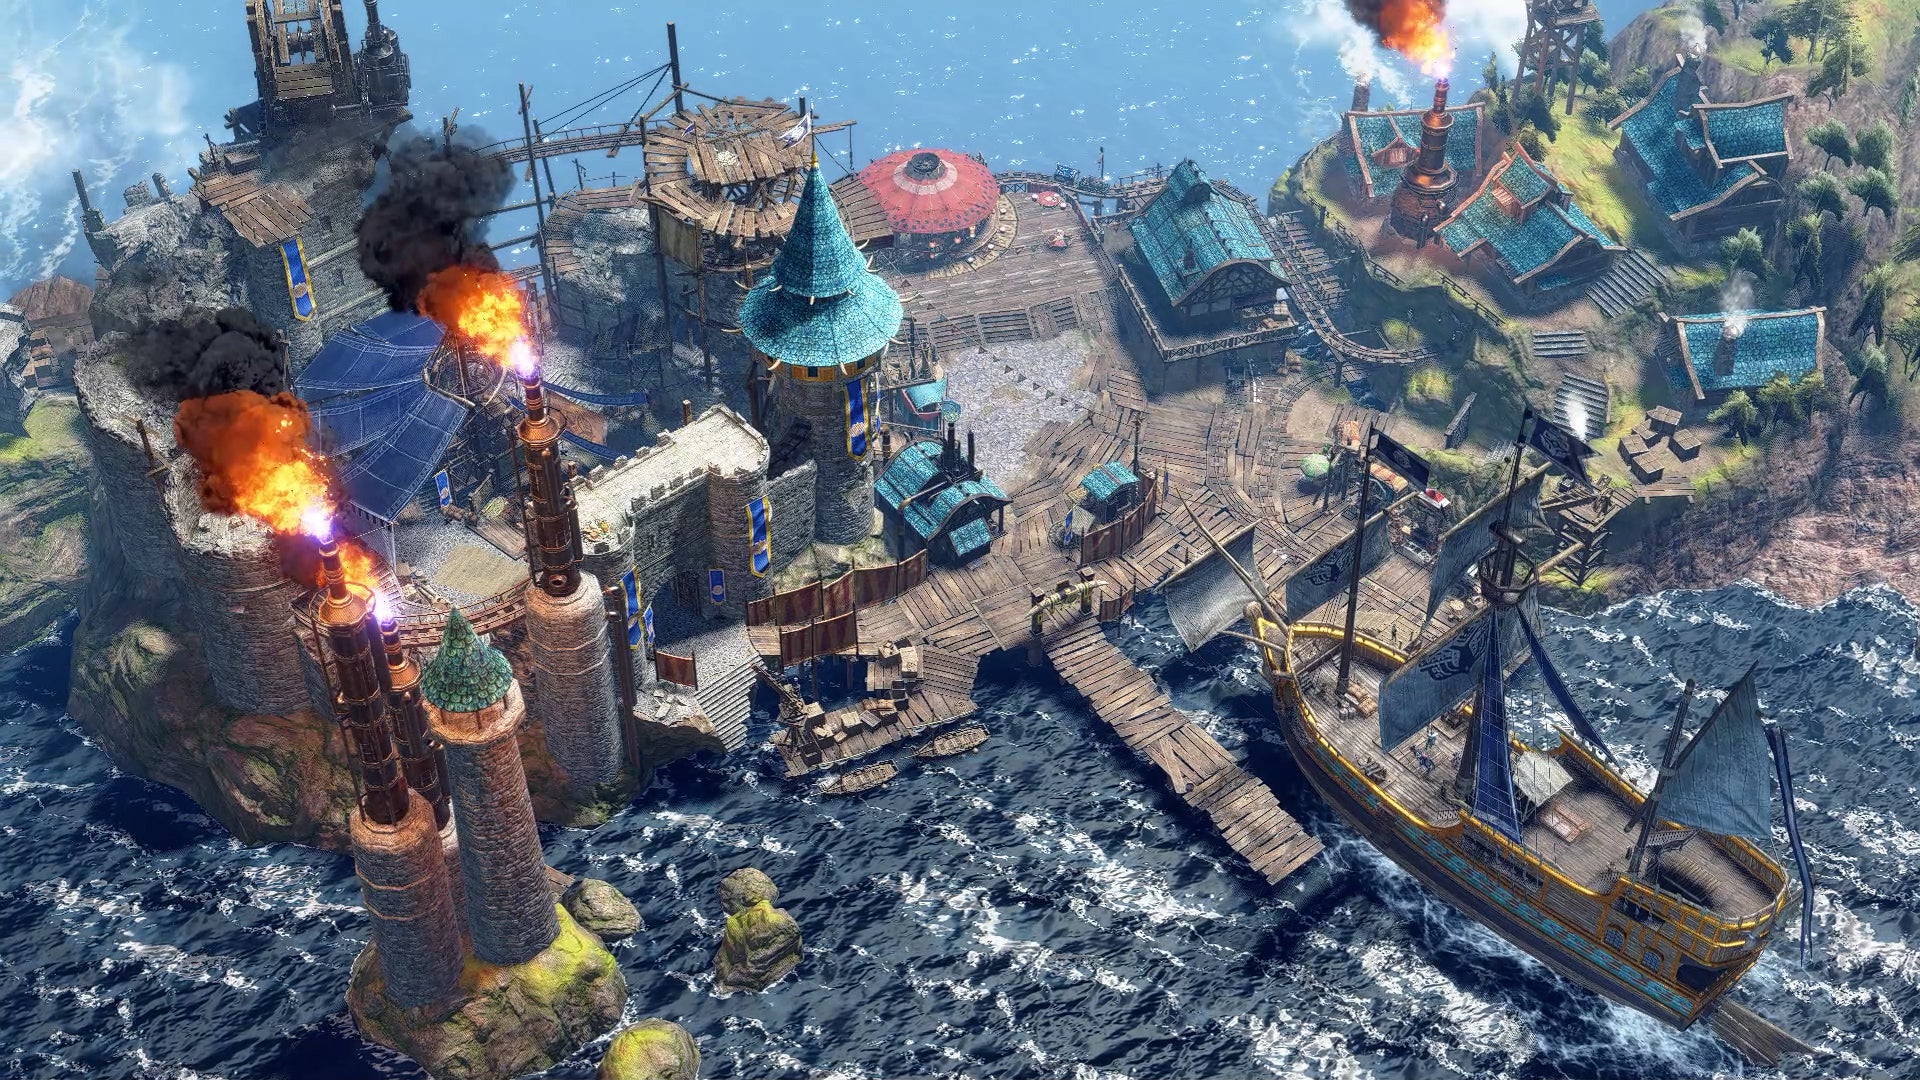 A medieval outpost surrounded by ocean. Fire blazes out of chimneys attached to a stone fort. The fort, called "Elgado", serves as the hub area in Monster Hunter Rise: Sunbreak